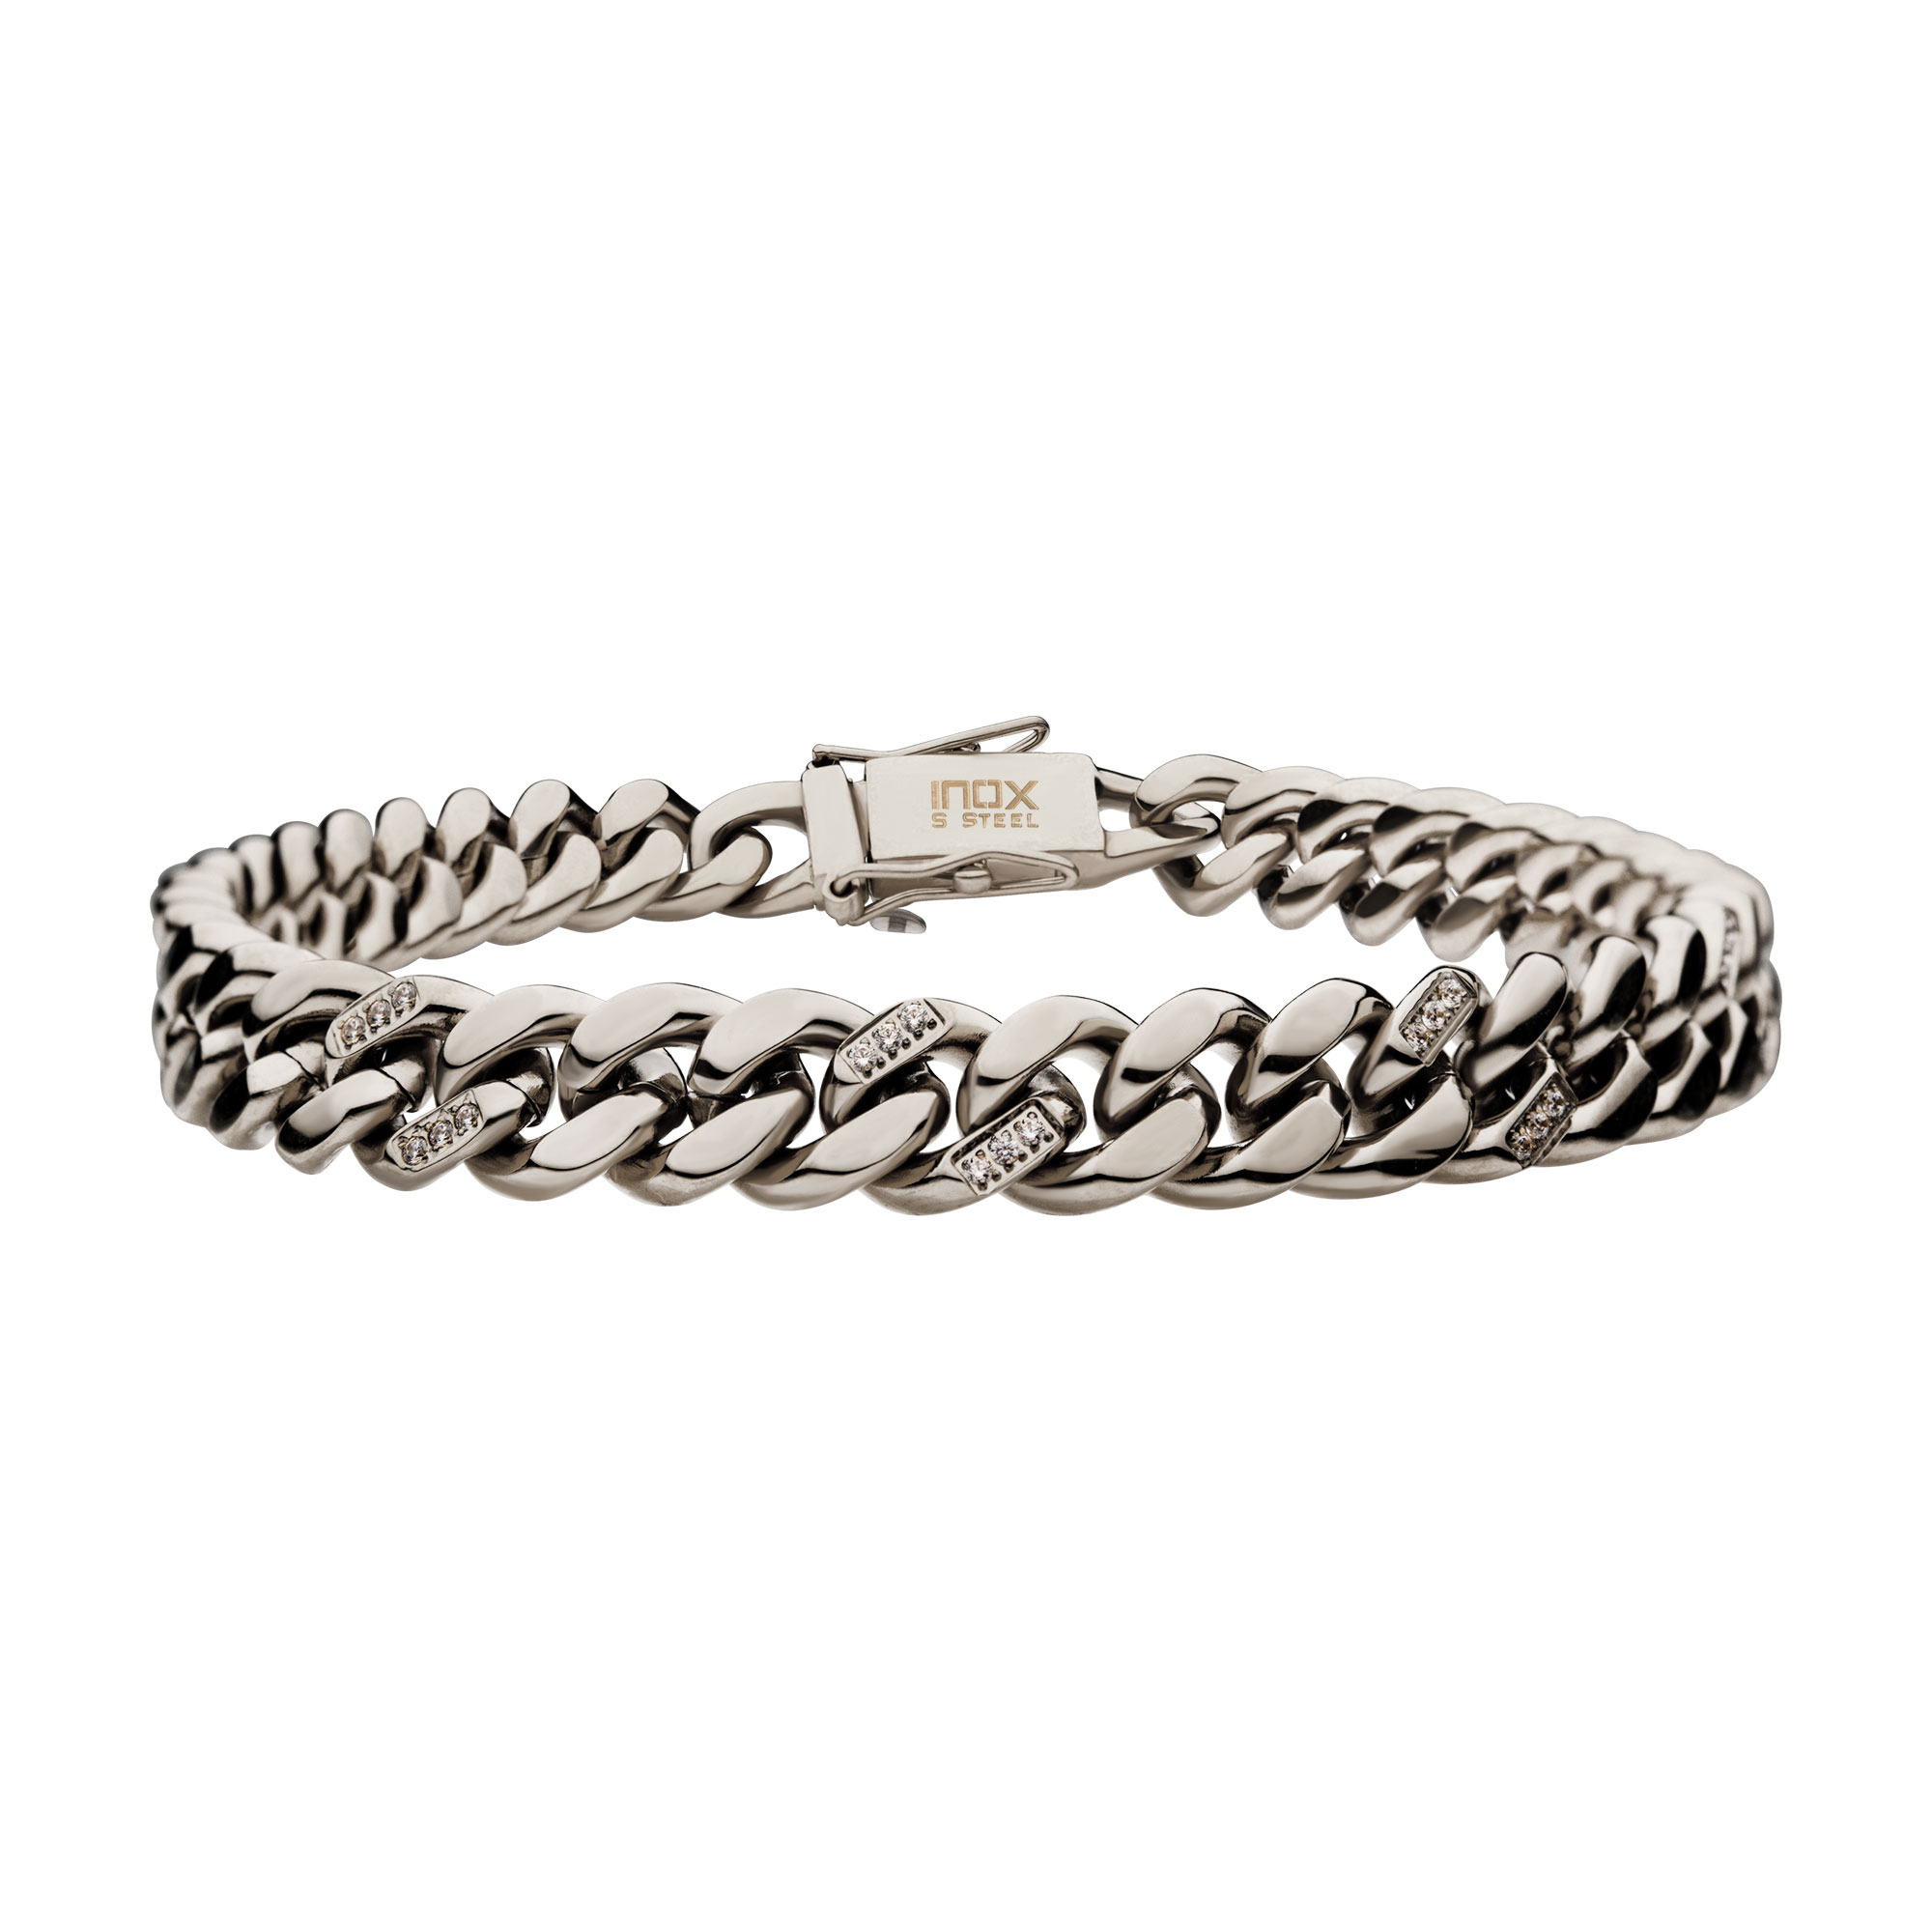 Stainless Steel with 30pcs Diamond Curb Chain Miami Cuban Bracelet Lewis Jewelers, Inc. Ansonia, CT